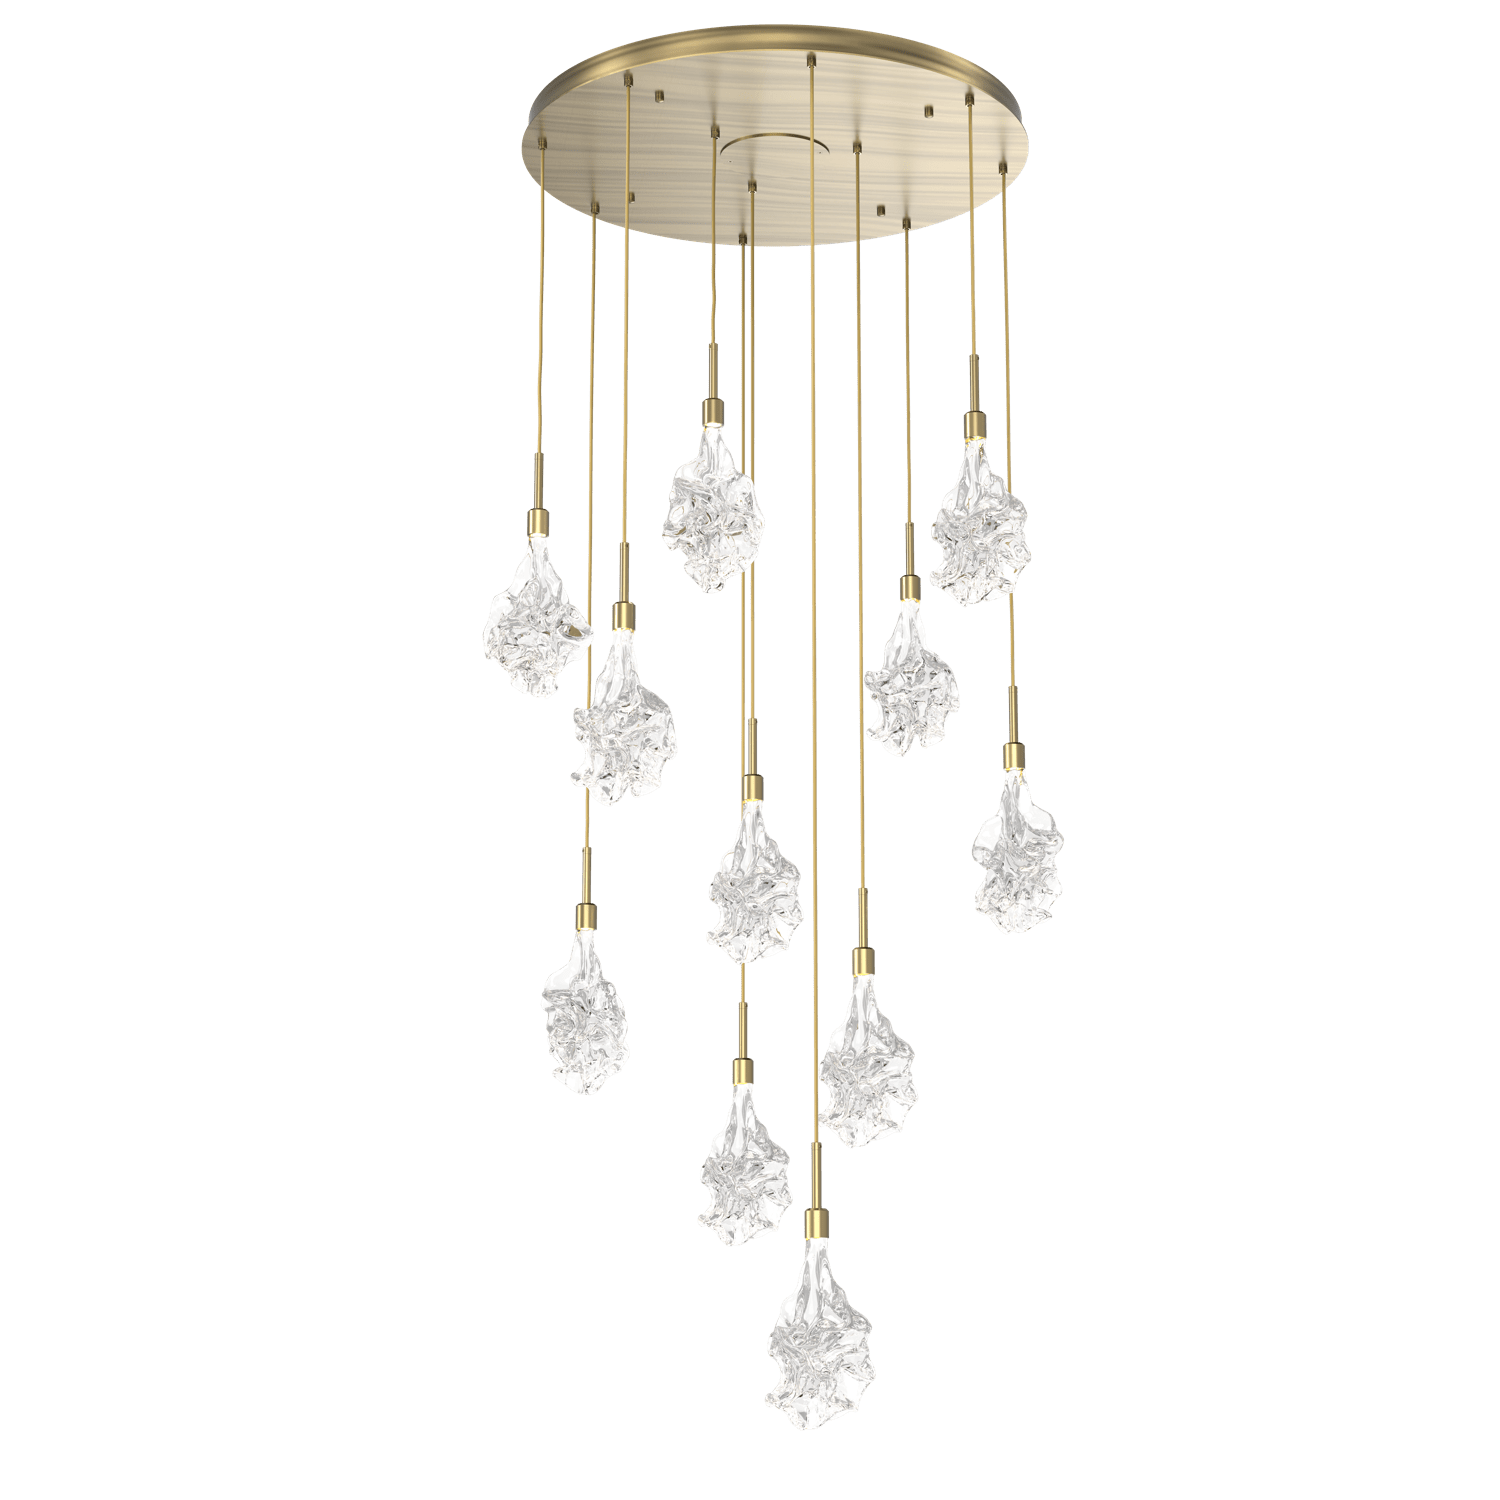 CHB0059-11-HB-Hammerton-Studio-Blossom-11-light-round-pendant-chandelier-with-heritage-brass-finish-and-clear-handblown-crystal-glass-shades-and-LED-lamping